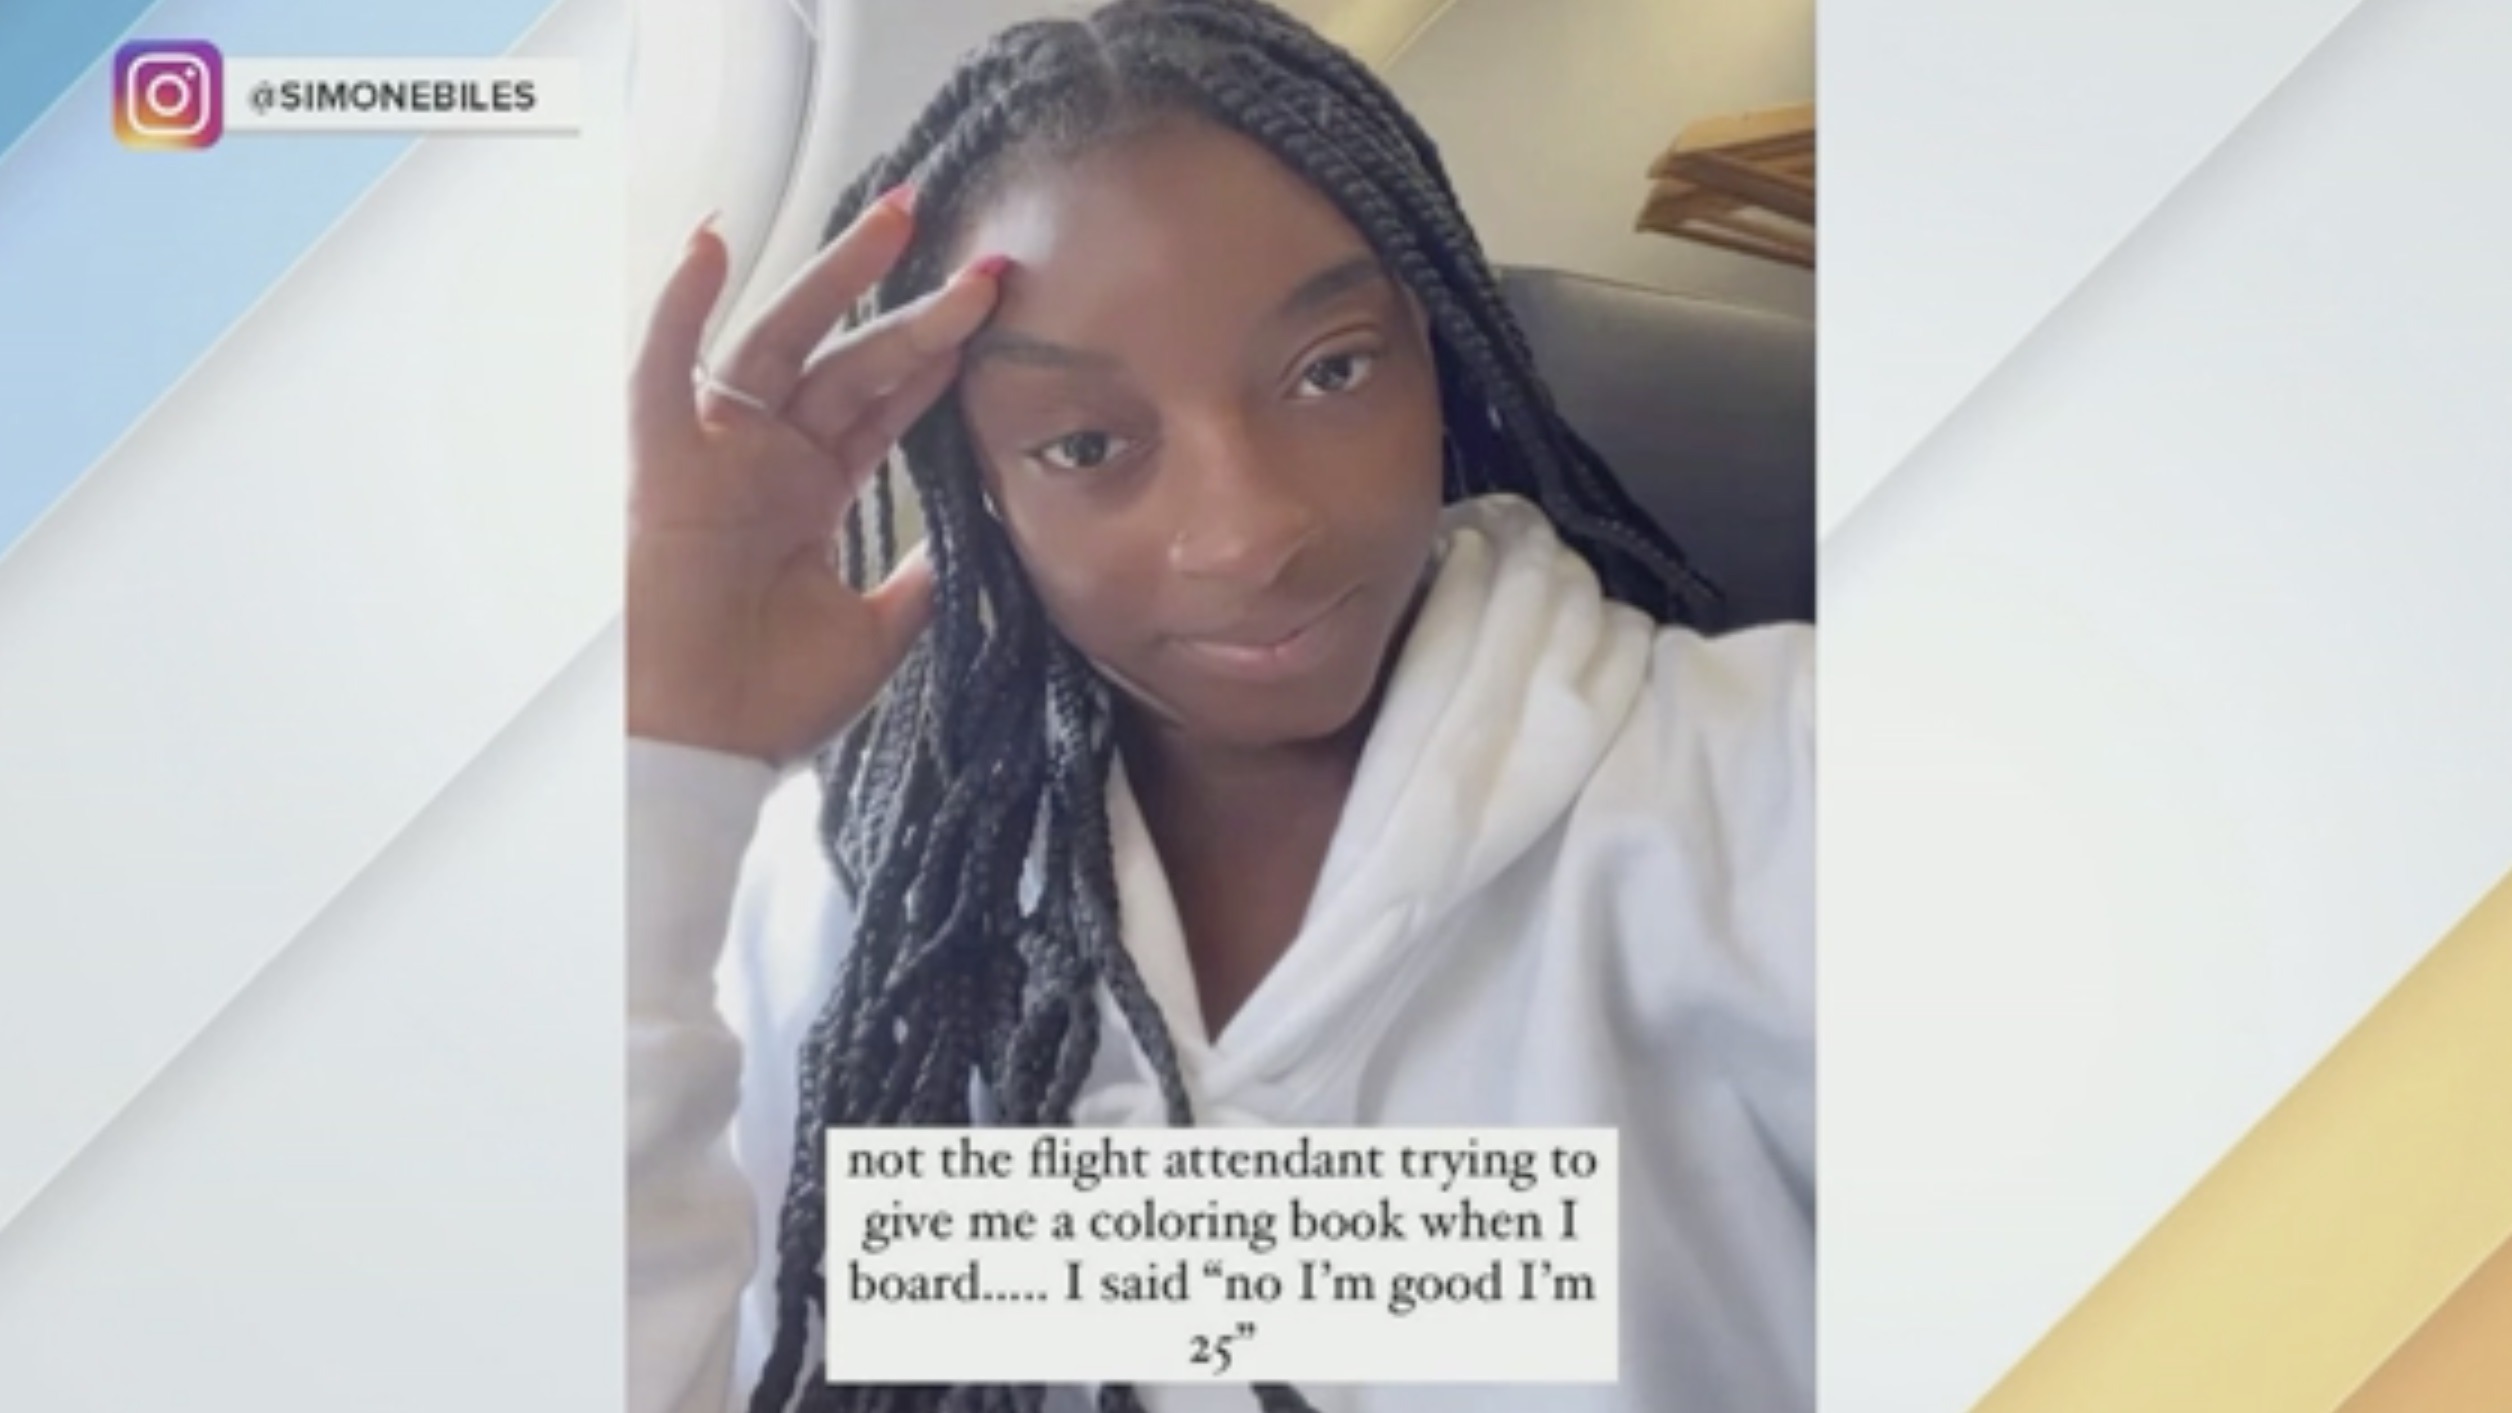 Simone Biles offered coloring book on Flight